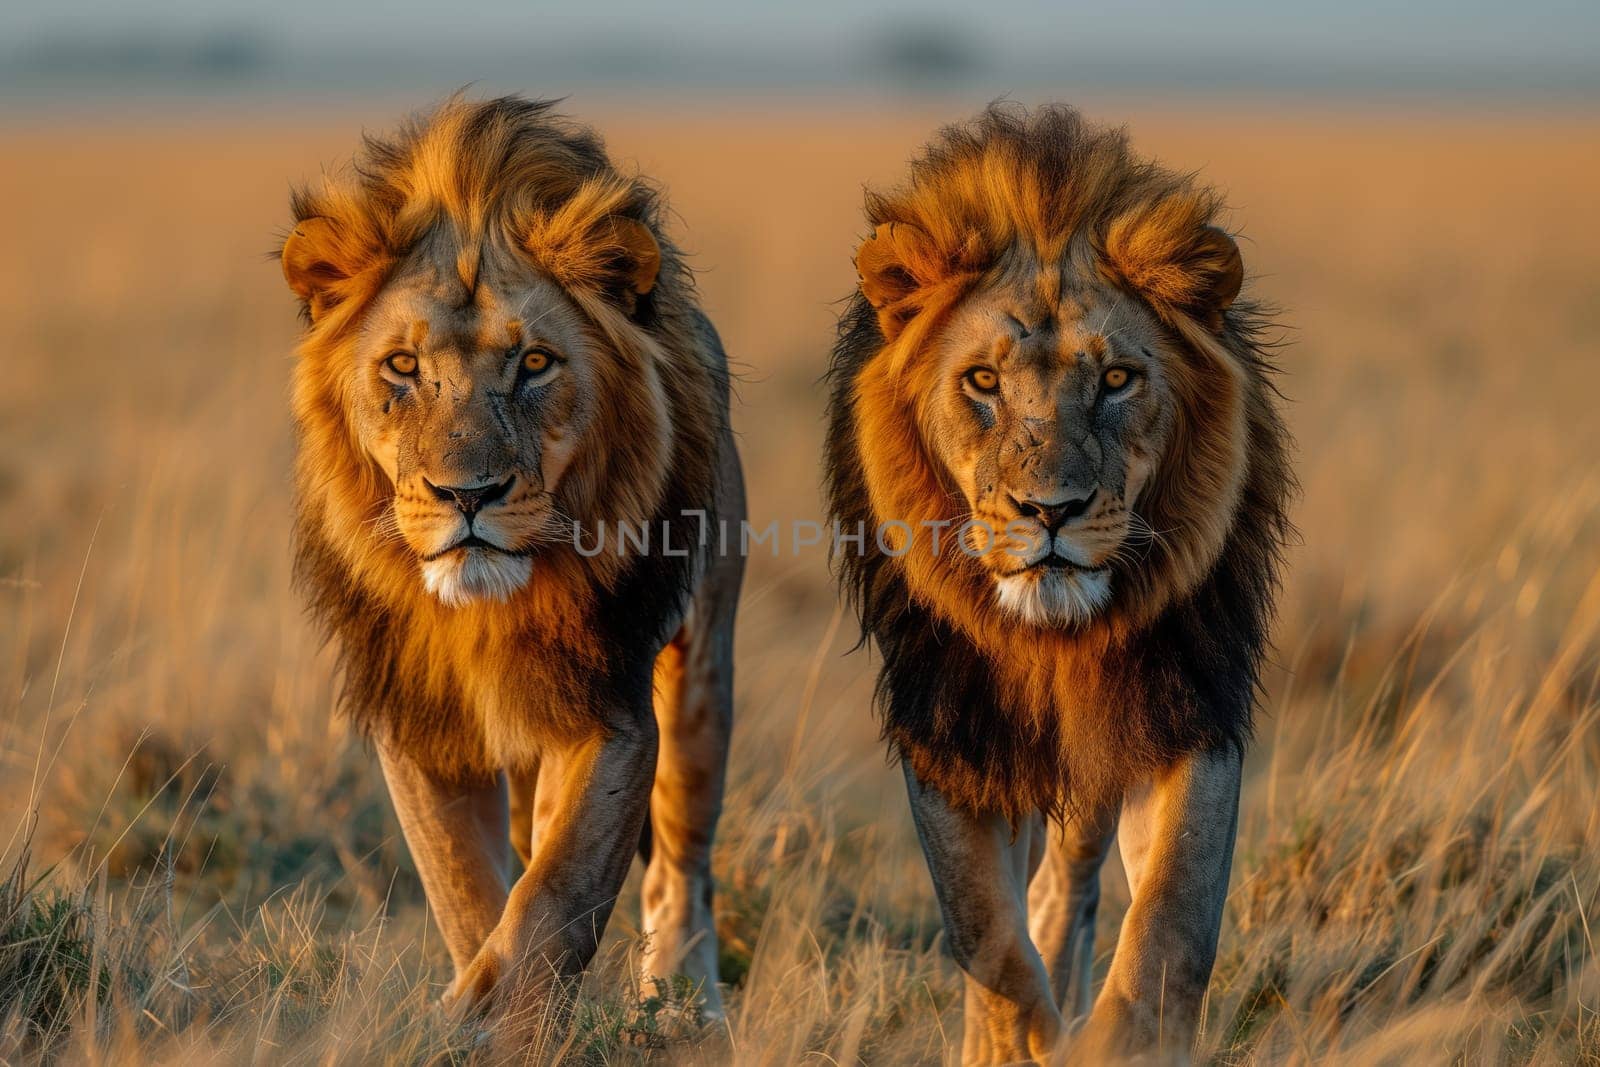 Two Masai lions, majestic carnivorous big cats from the Felidae family, roam side by side in a grassy plain, a natural landscape filled with lush green grass